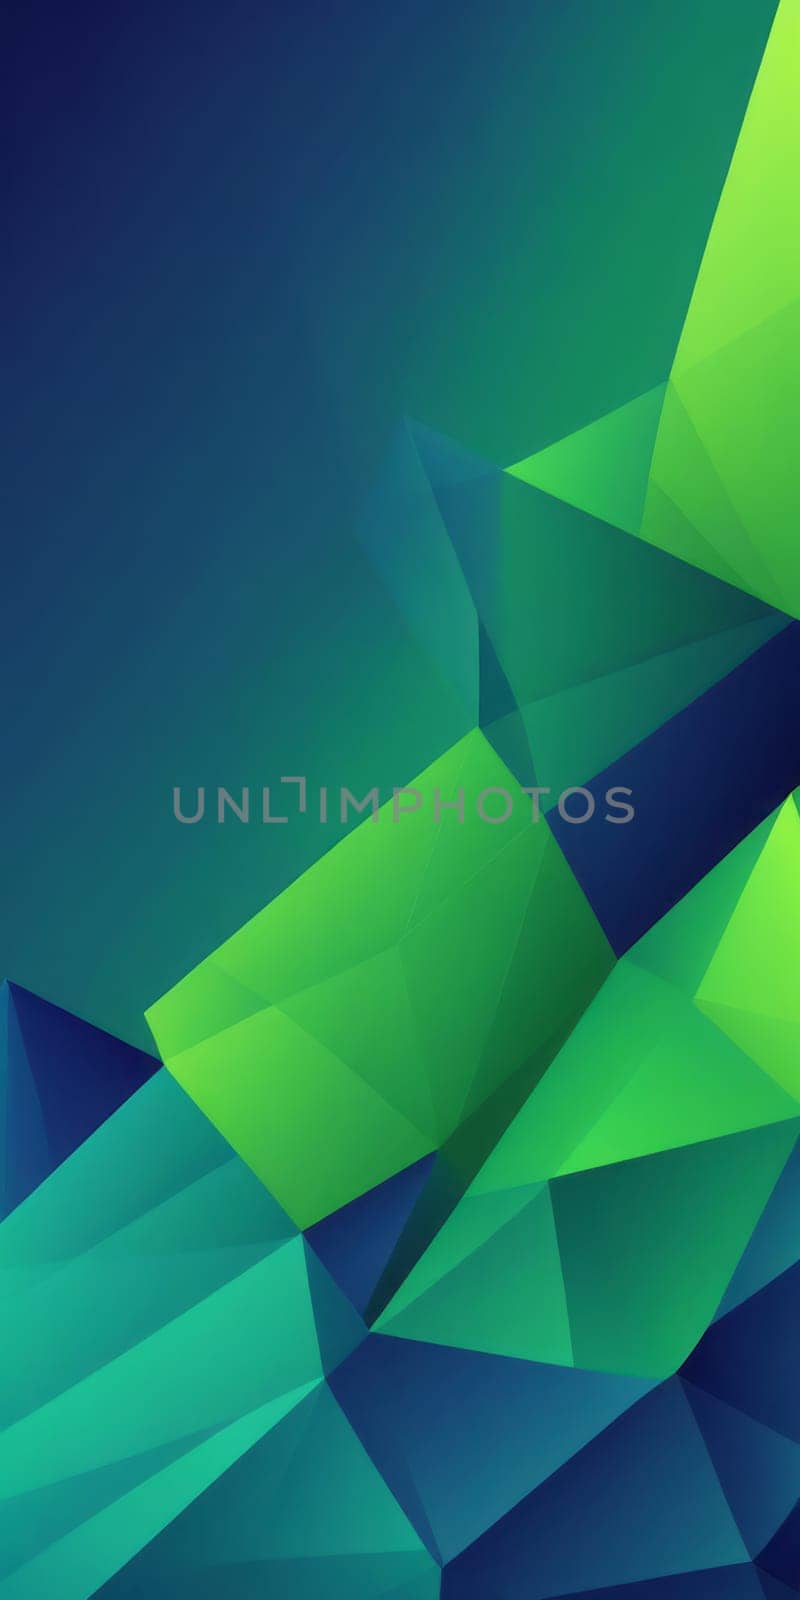 Polygonal Shapes in Green and Blue by nkotlyar